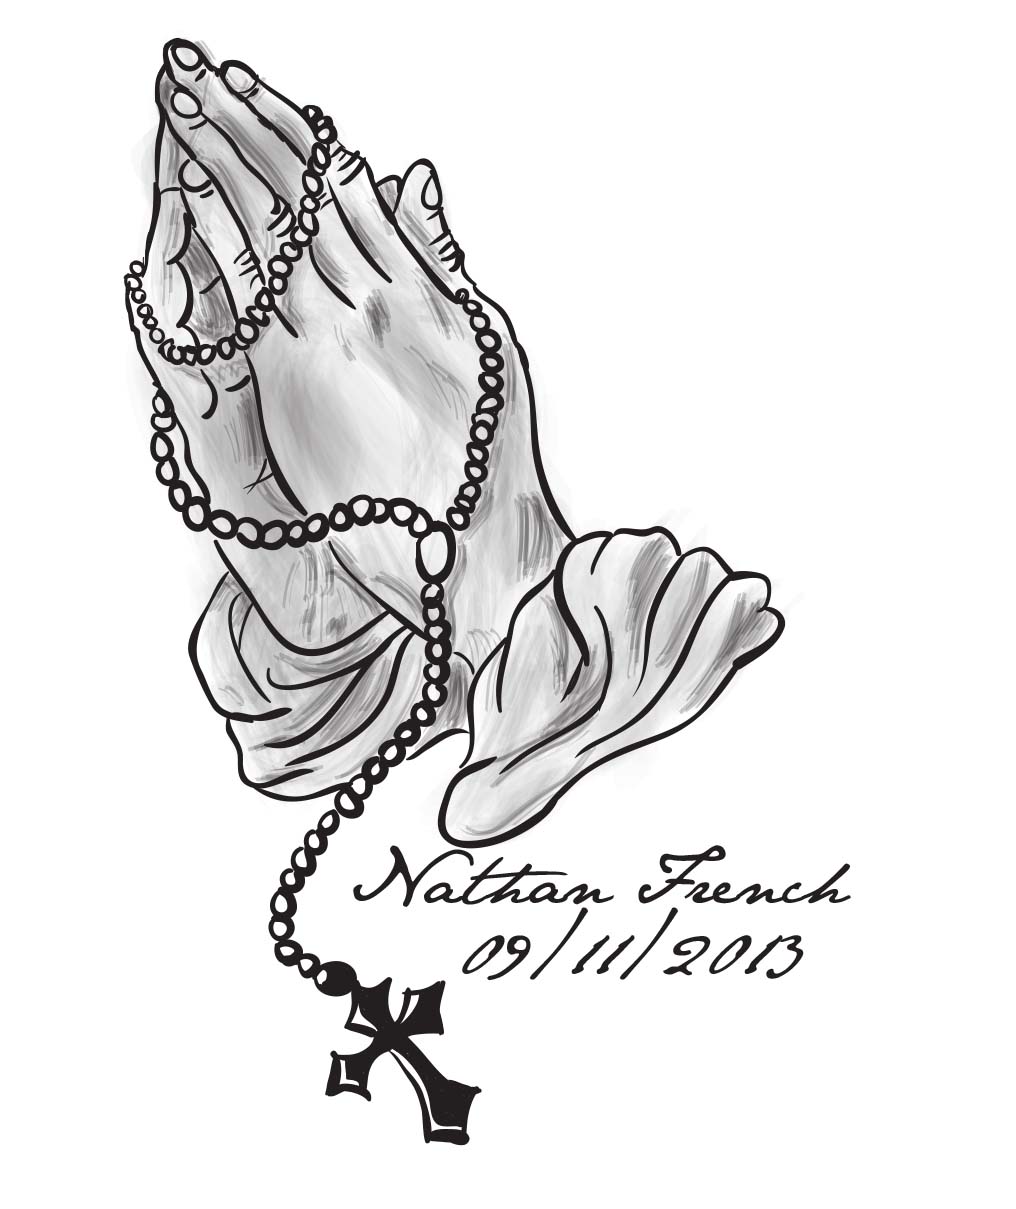 praying hands with rosary beads drawing - willianweinberg